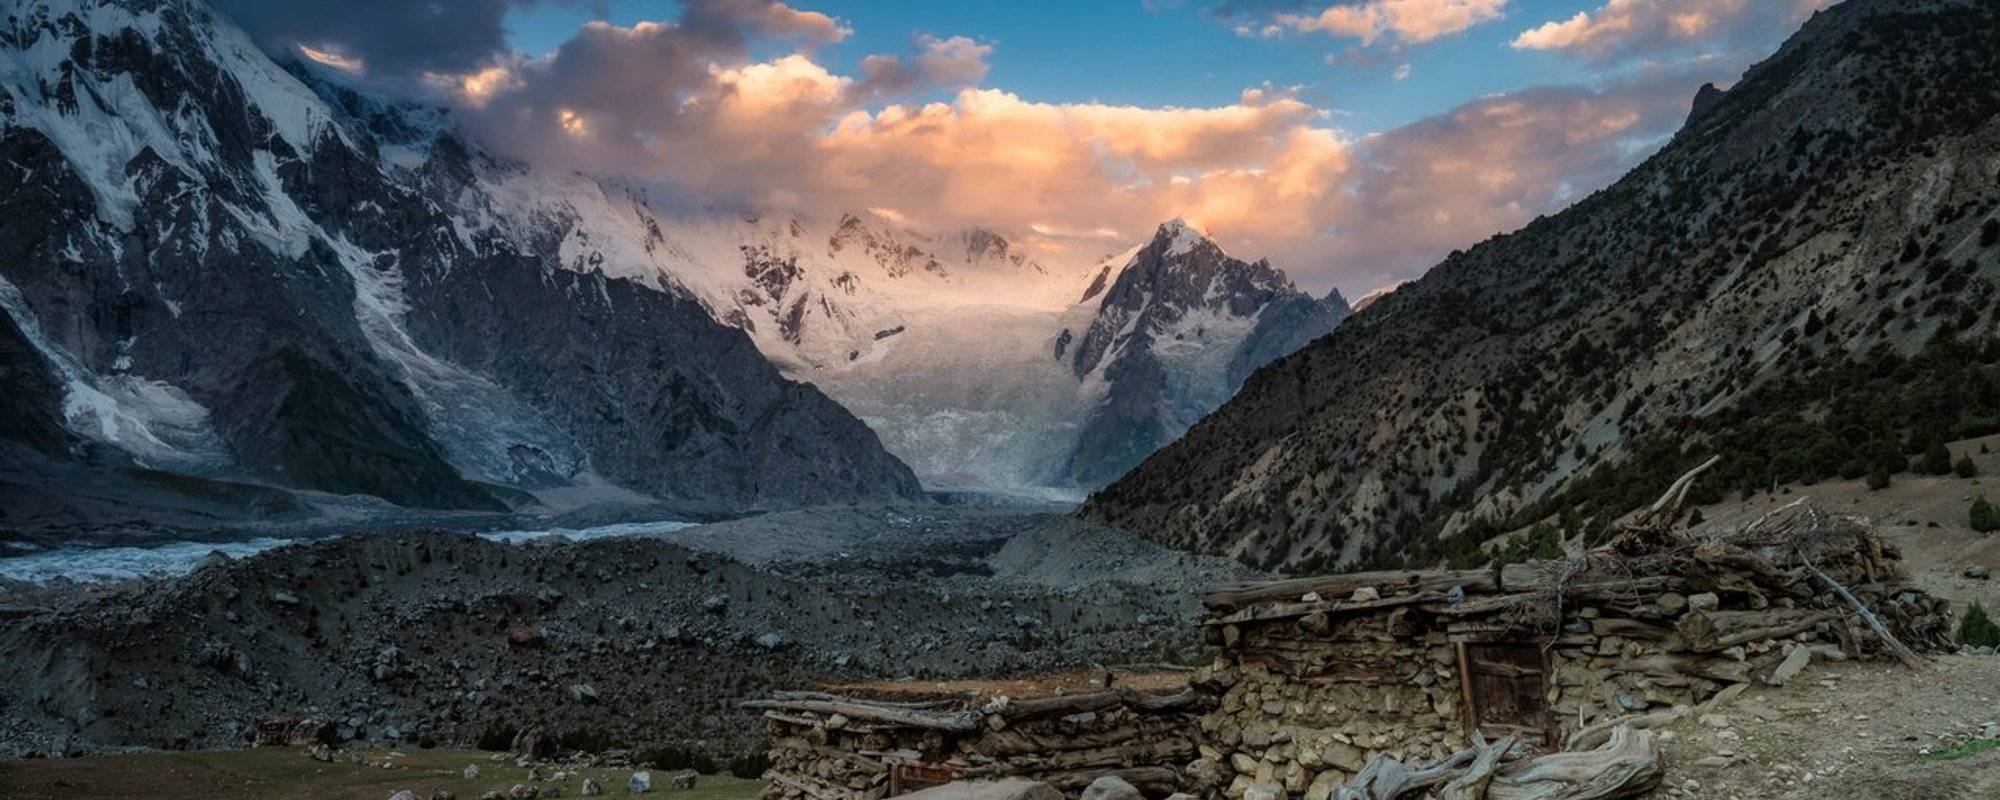 📷 The Land of High Mountains: Pakistan. Day 12. Trekking to Nowhere